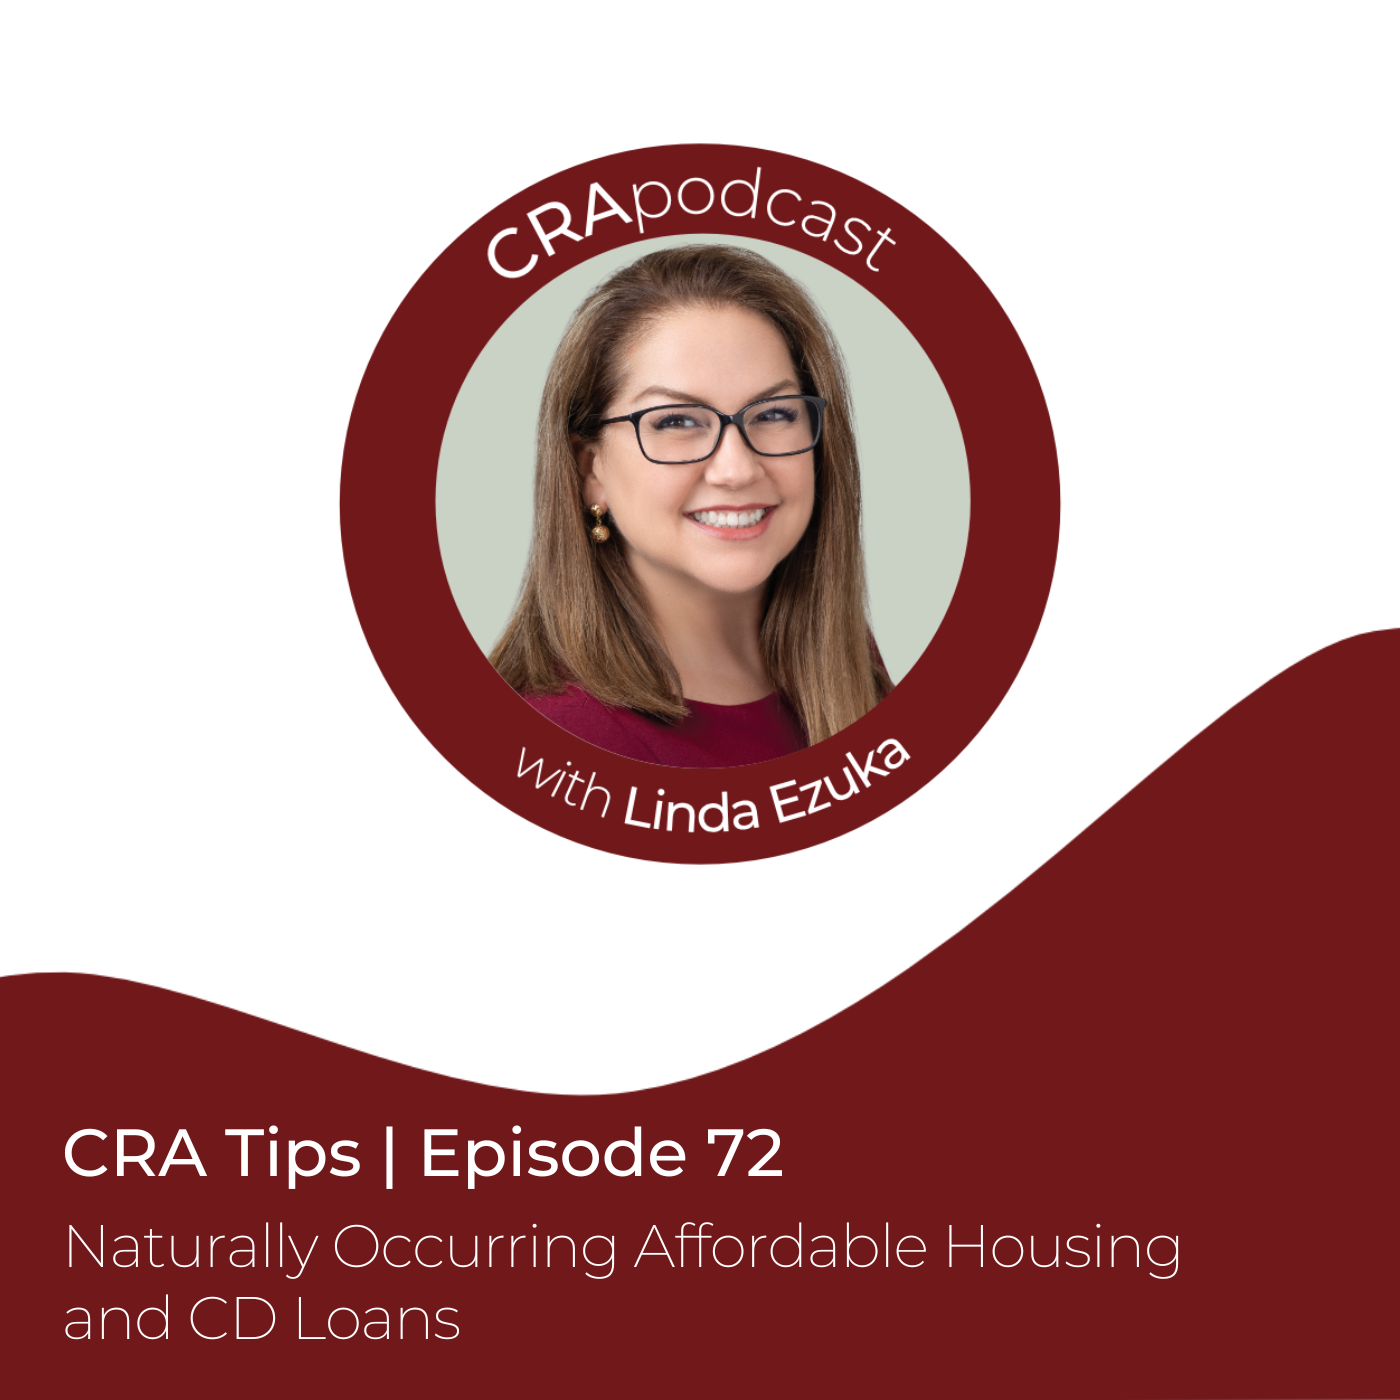 Episode 72: CRA Tips: Naturally Occurring Affordable Housing and CD Loans